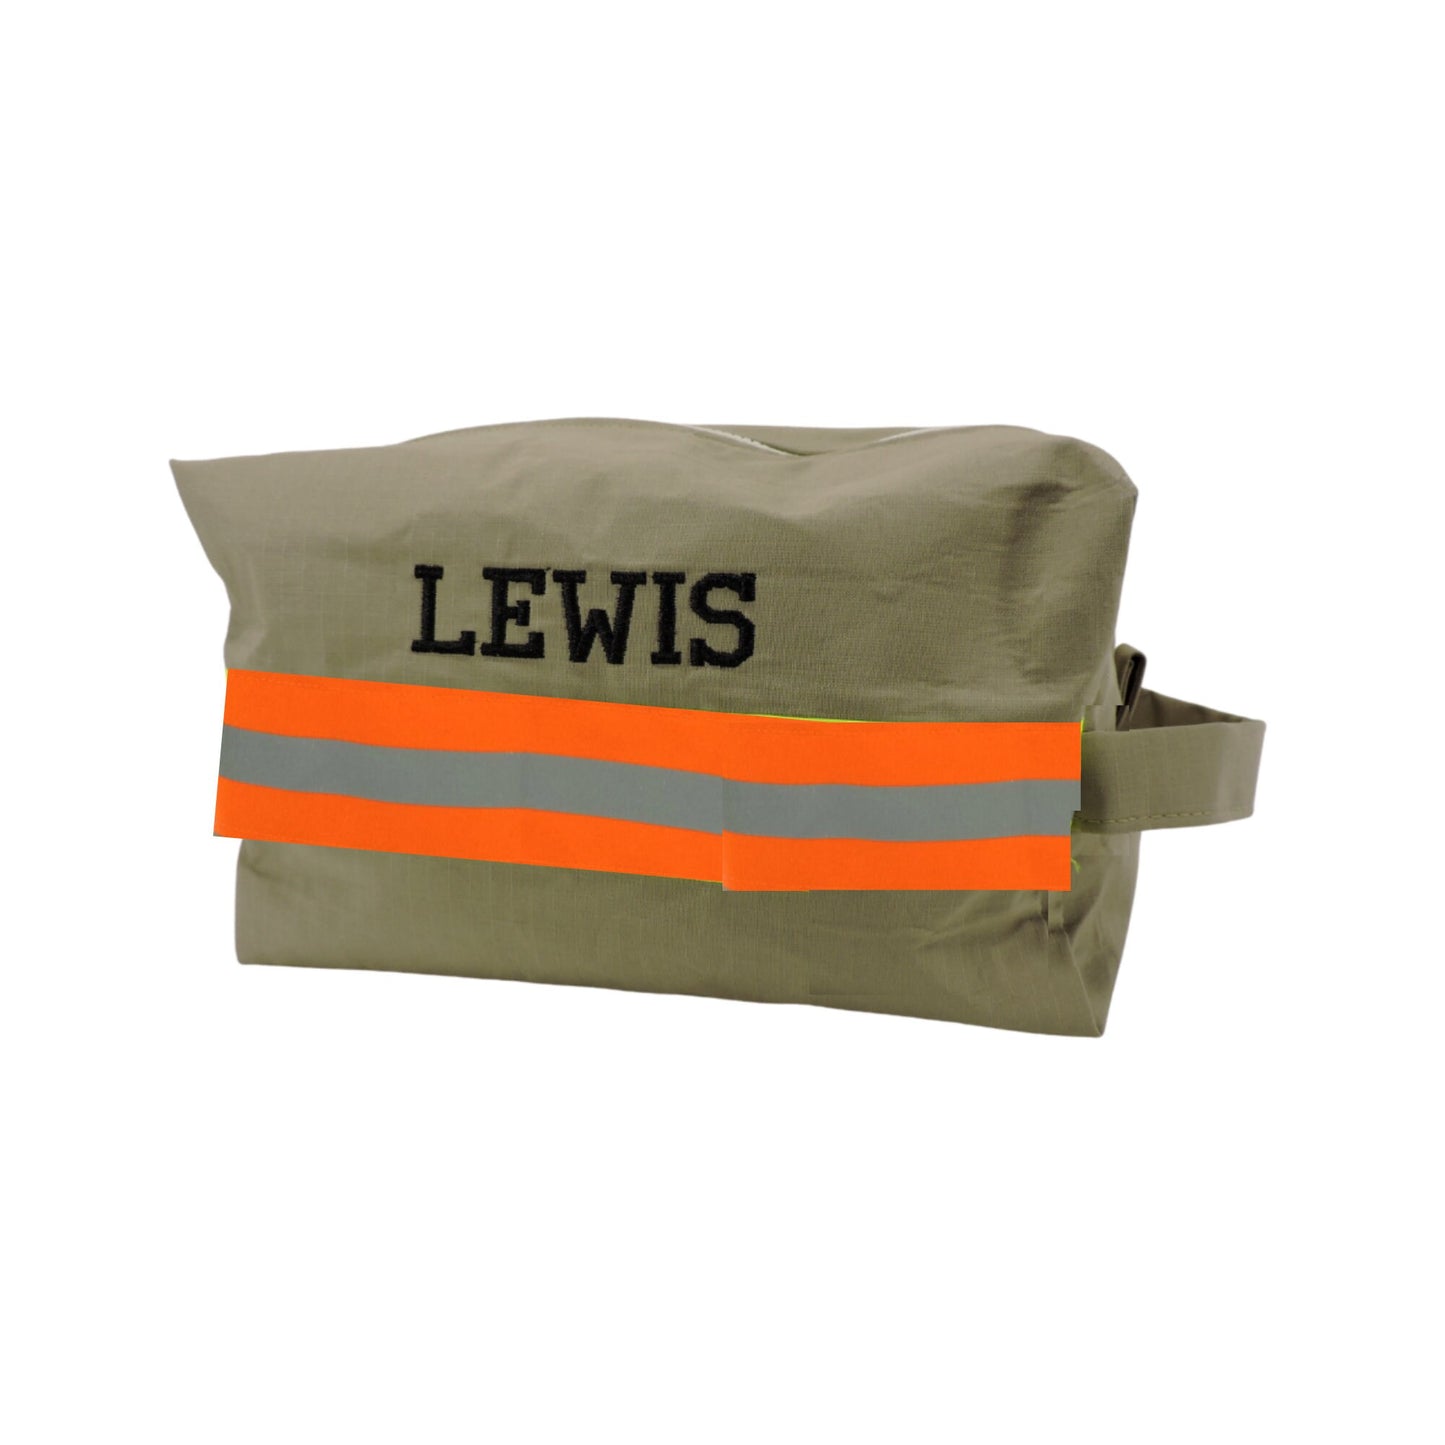 Tan fabric orange reflective tape firefighter toiletry bag